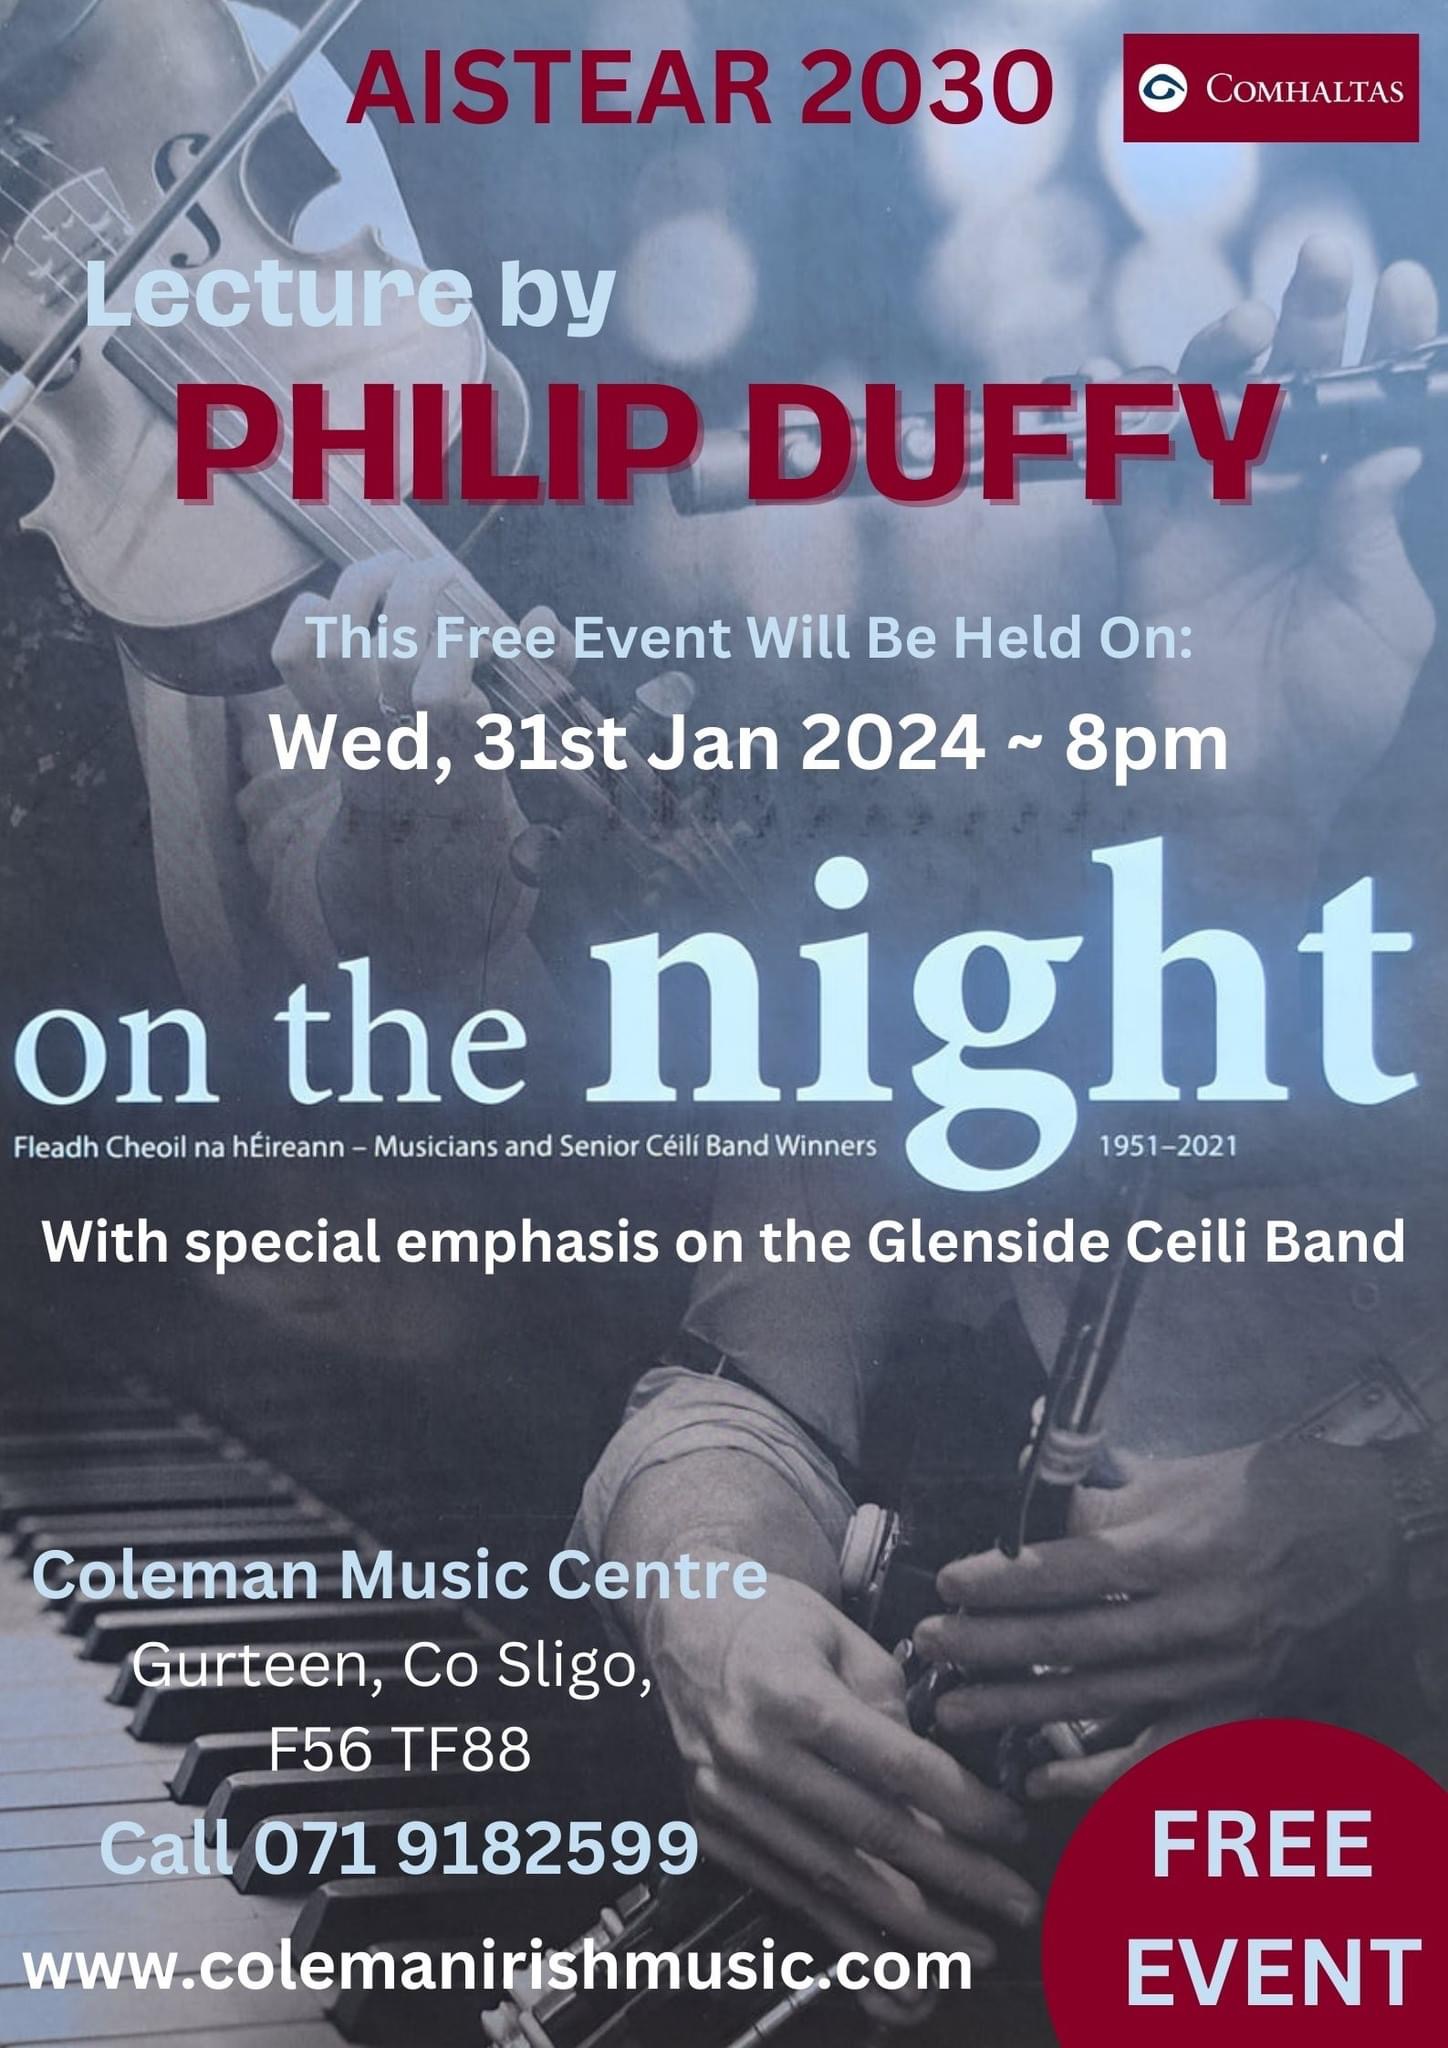 On The Night Book Launch and Talk by Philip Duffy - Cultúrlann na hÉireann, Belgrave Square, Monkstown on Saturday 16th December, at 7pm